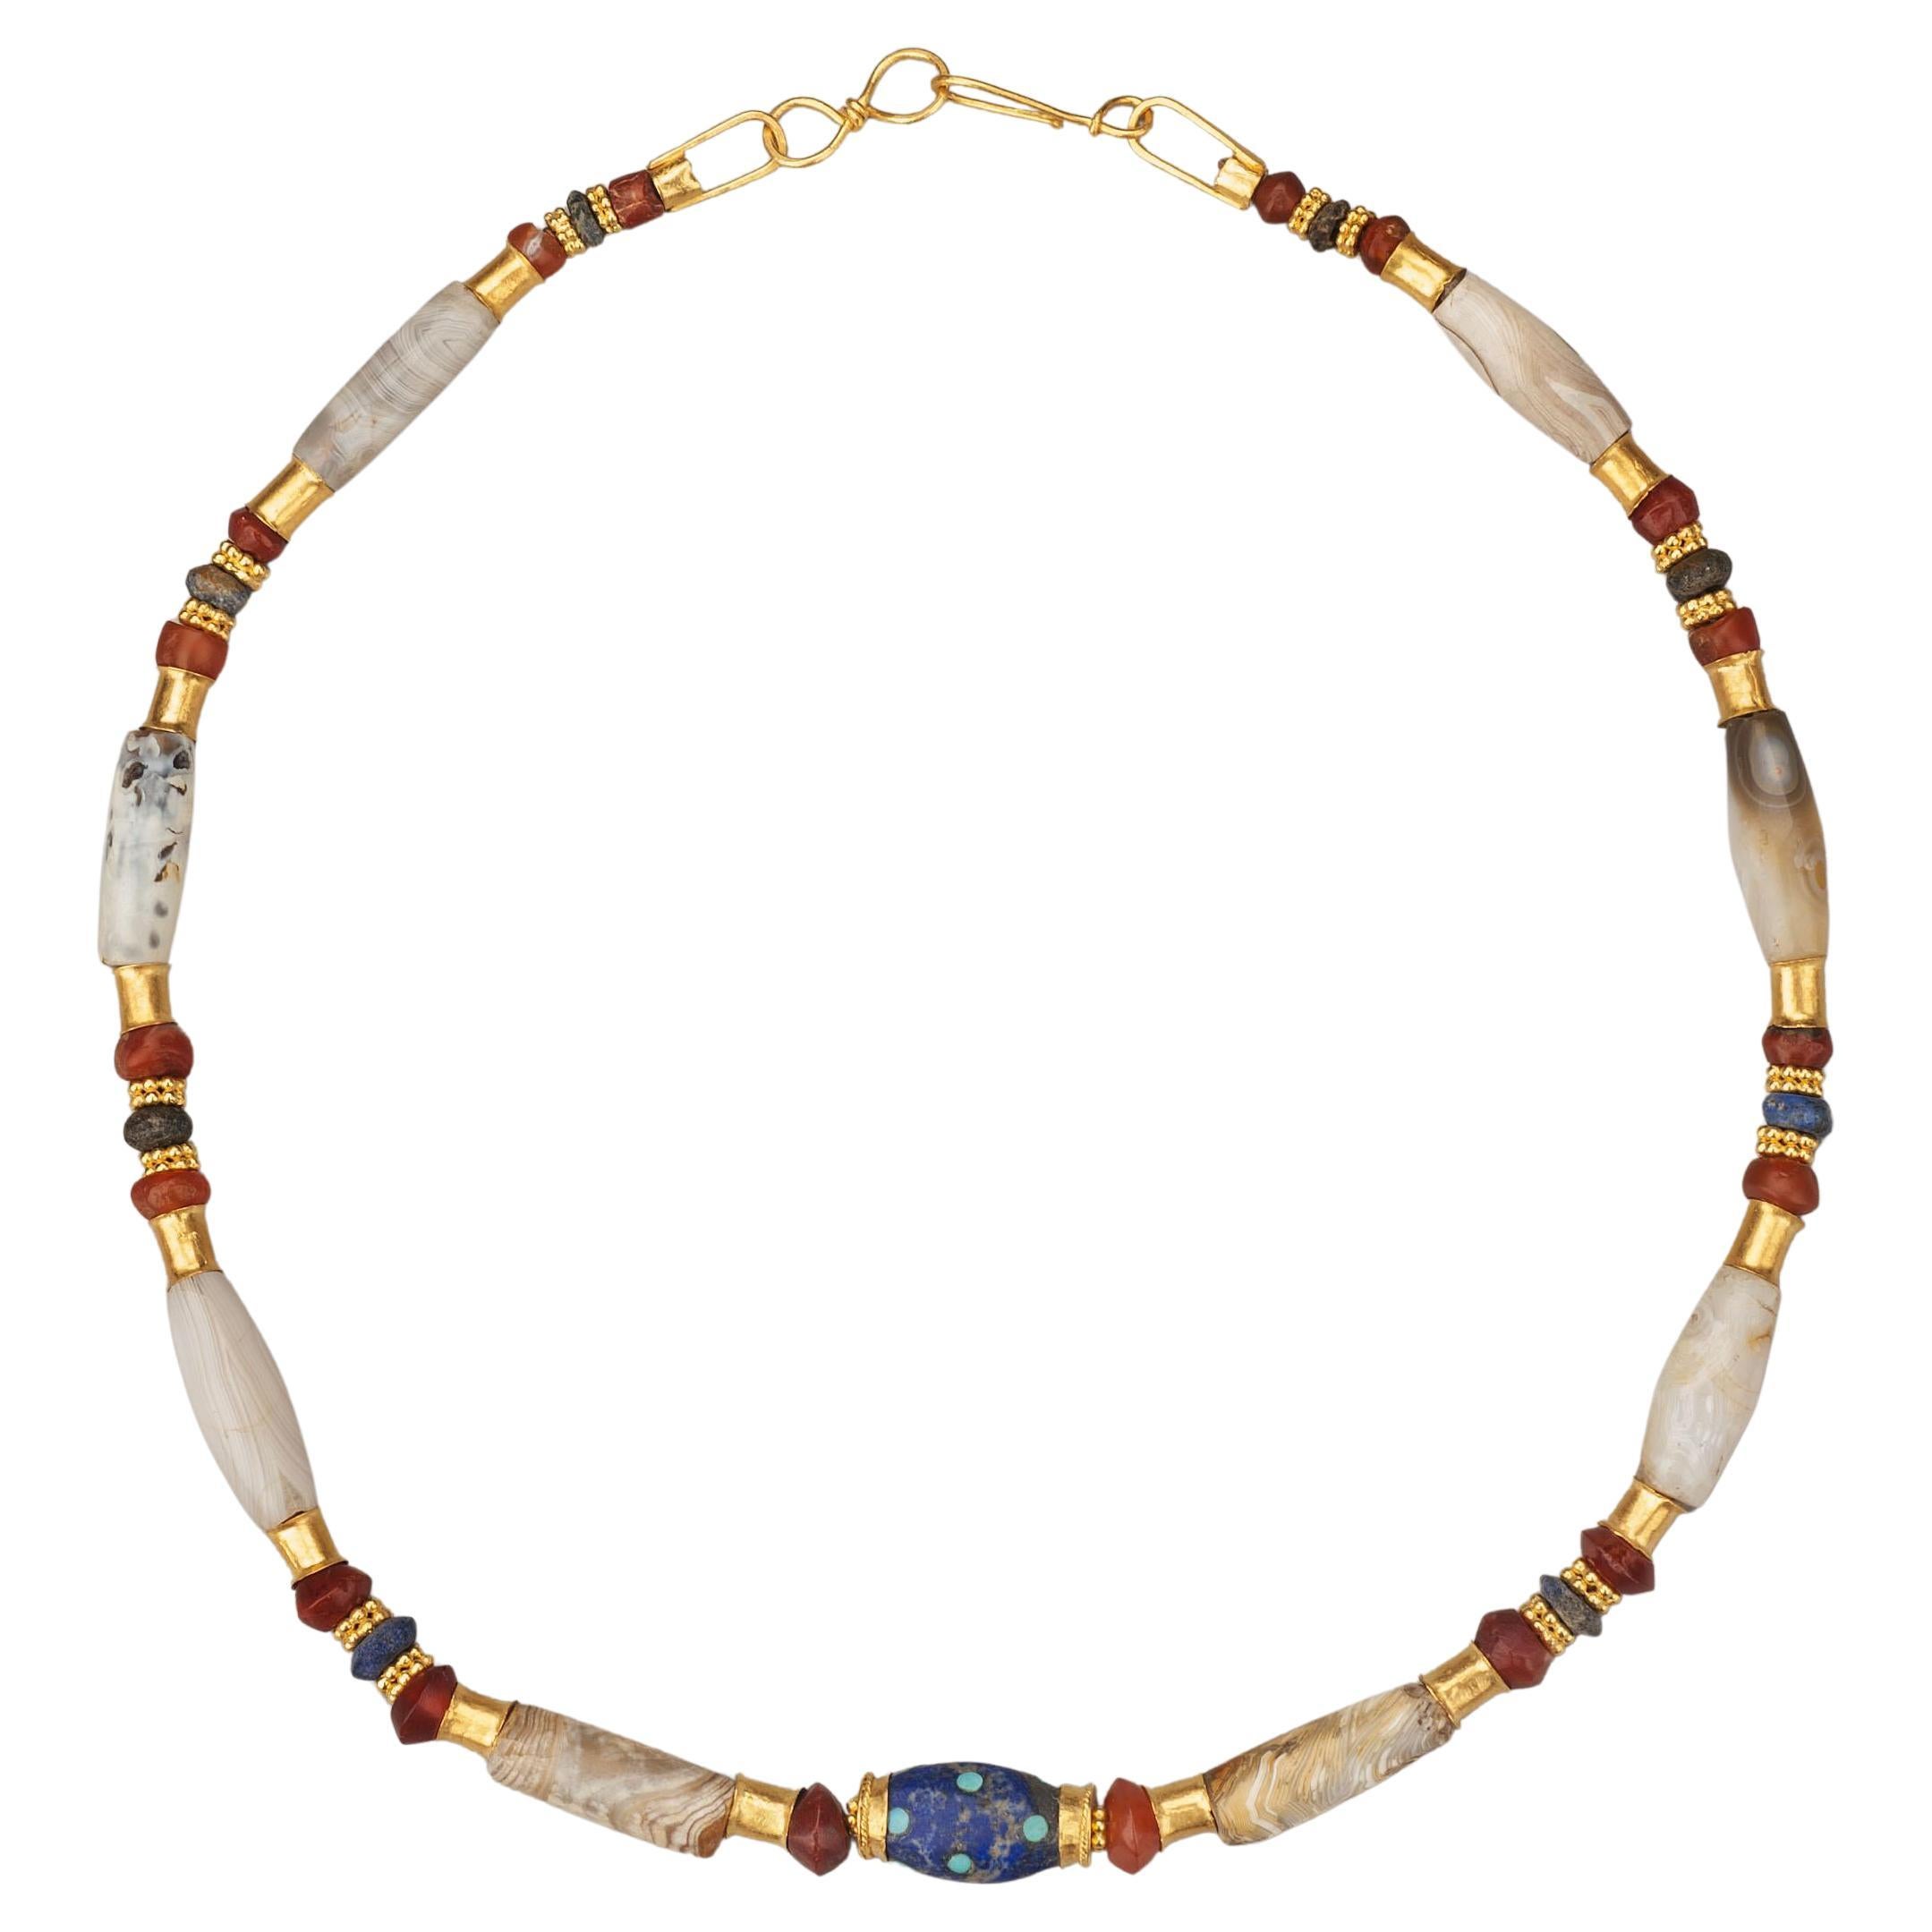 Ancient Chalcedony, Carnelian, 20k Gold, Lapis Center Bead Inlaid with Turquoise For Sale